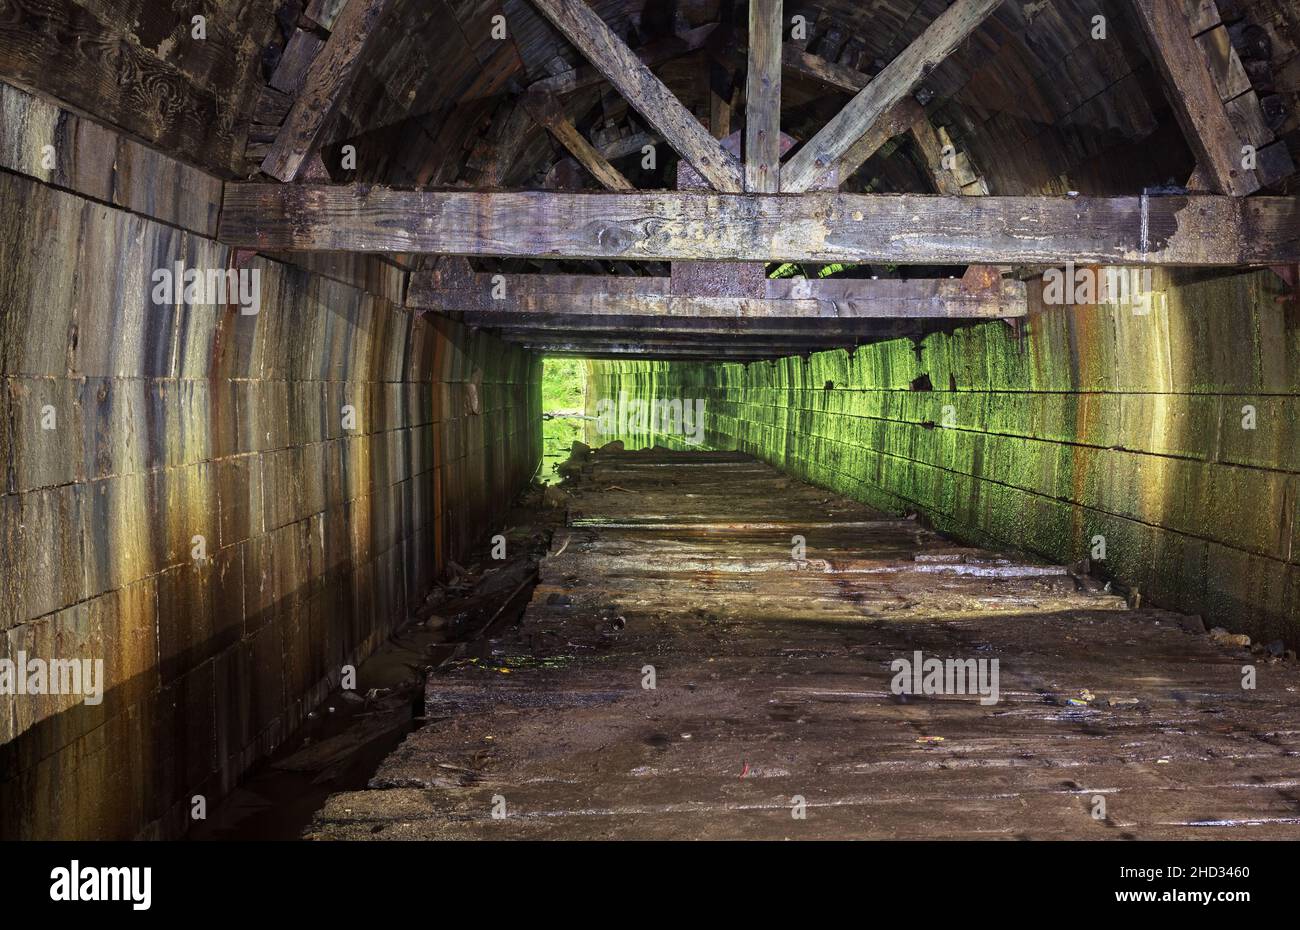 The abandoned Merriton Tunnel aka Blue Ghost Tunnel or Grand Trunk Railway Tunnel. Ontario, Canada. Stock Photo